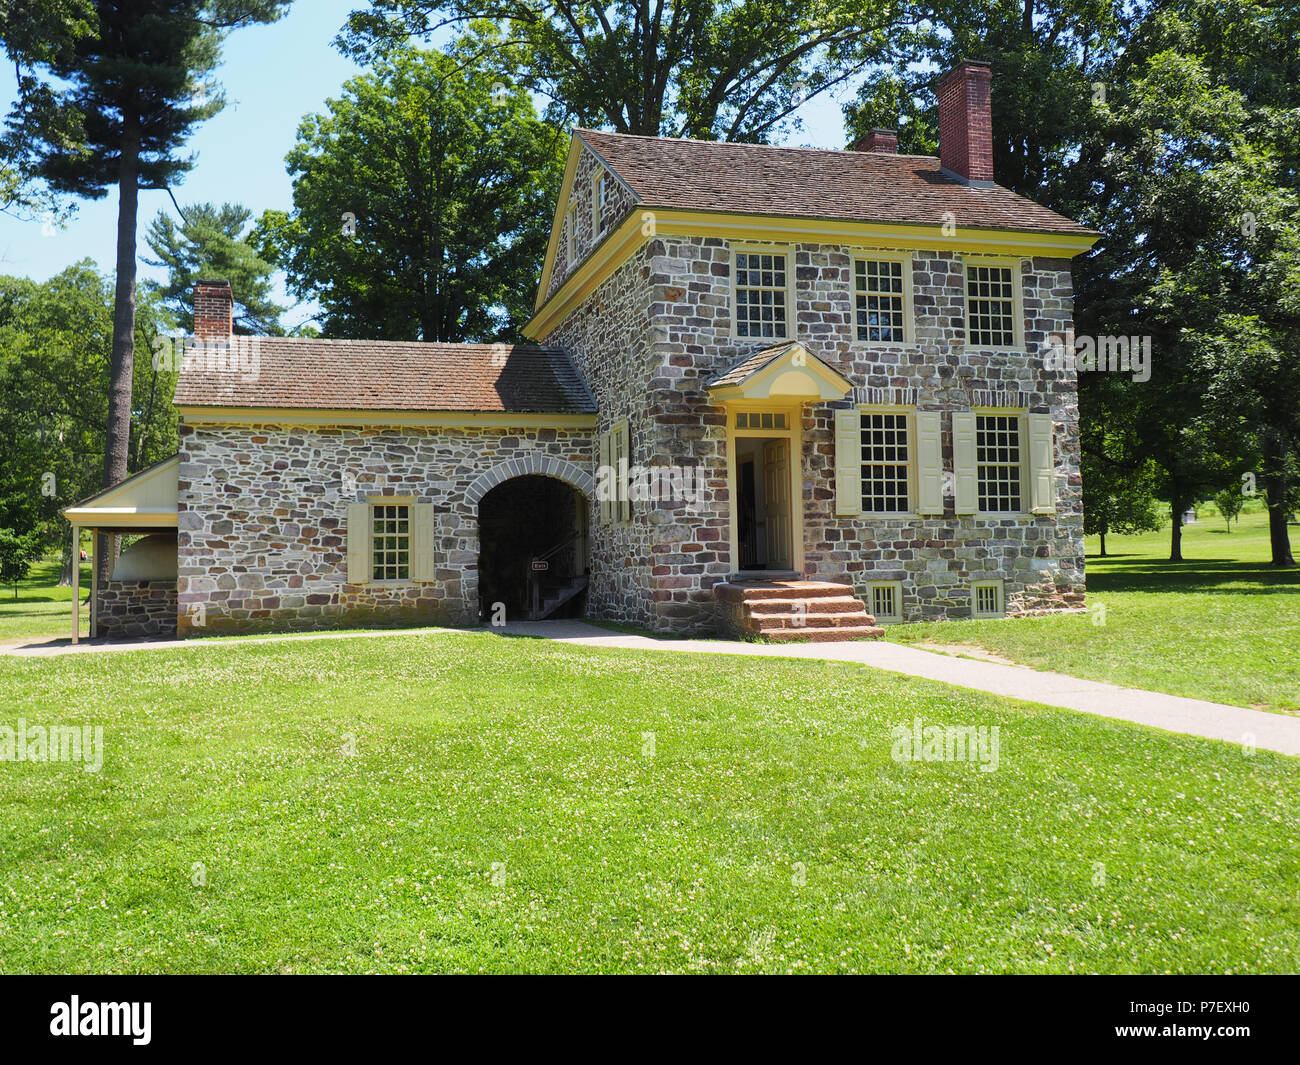 The headquarters for General George Washington in Valley Forge during the Revolutionary War. Stock Photo